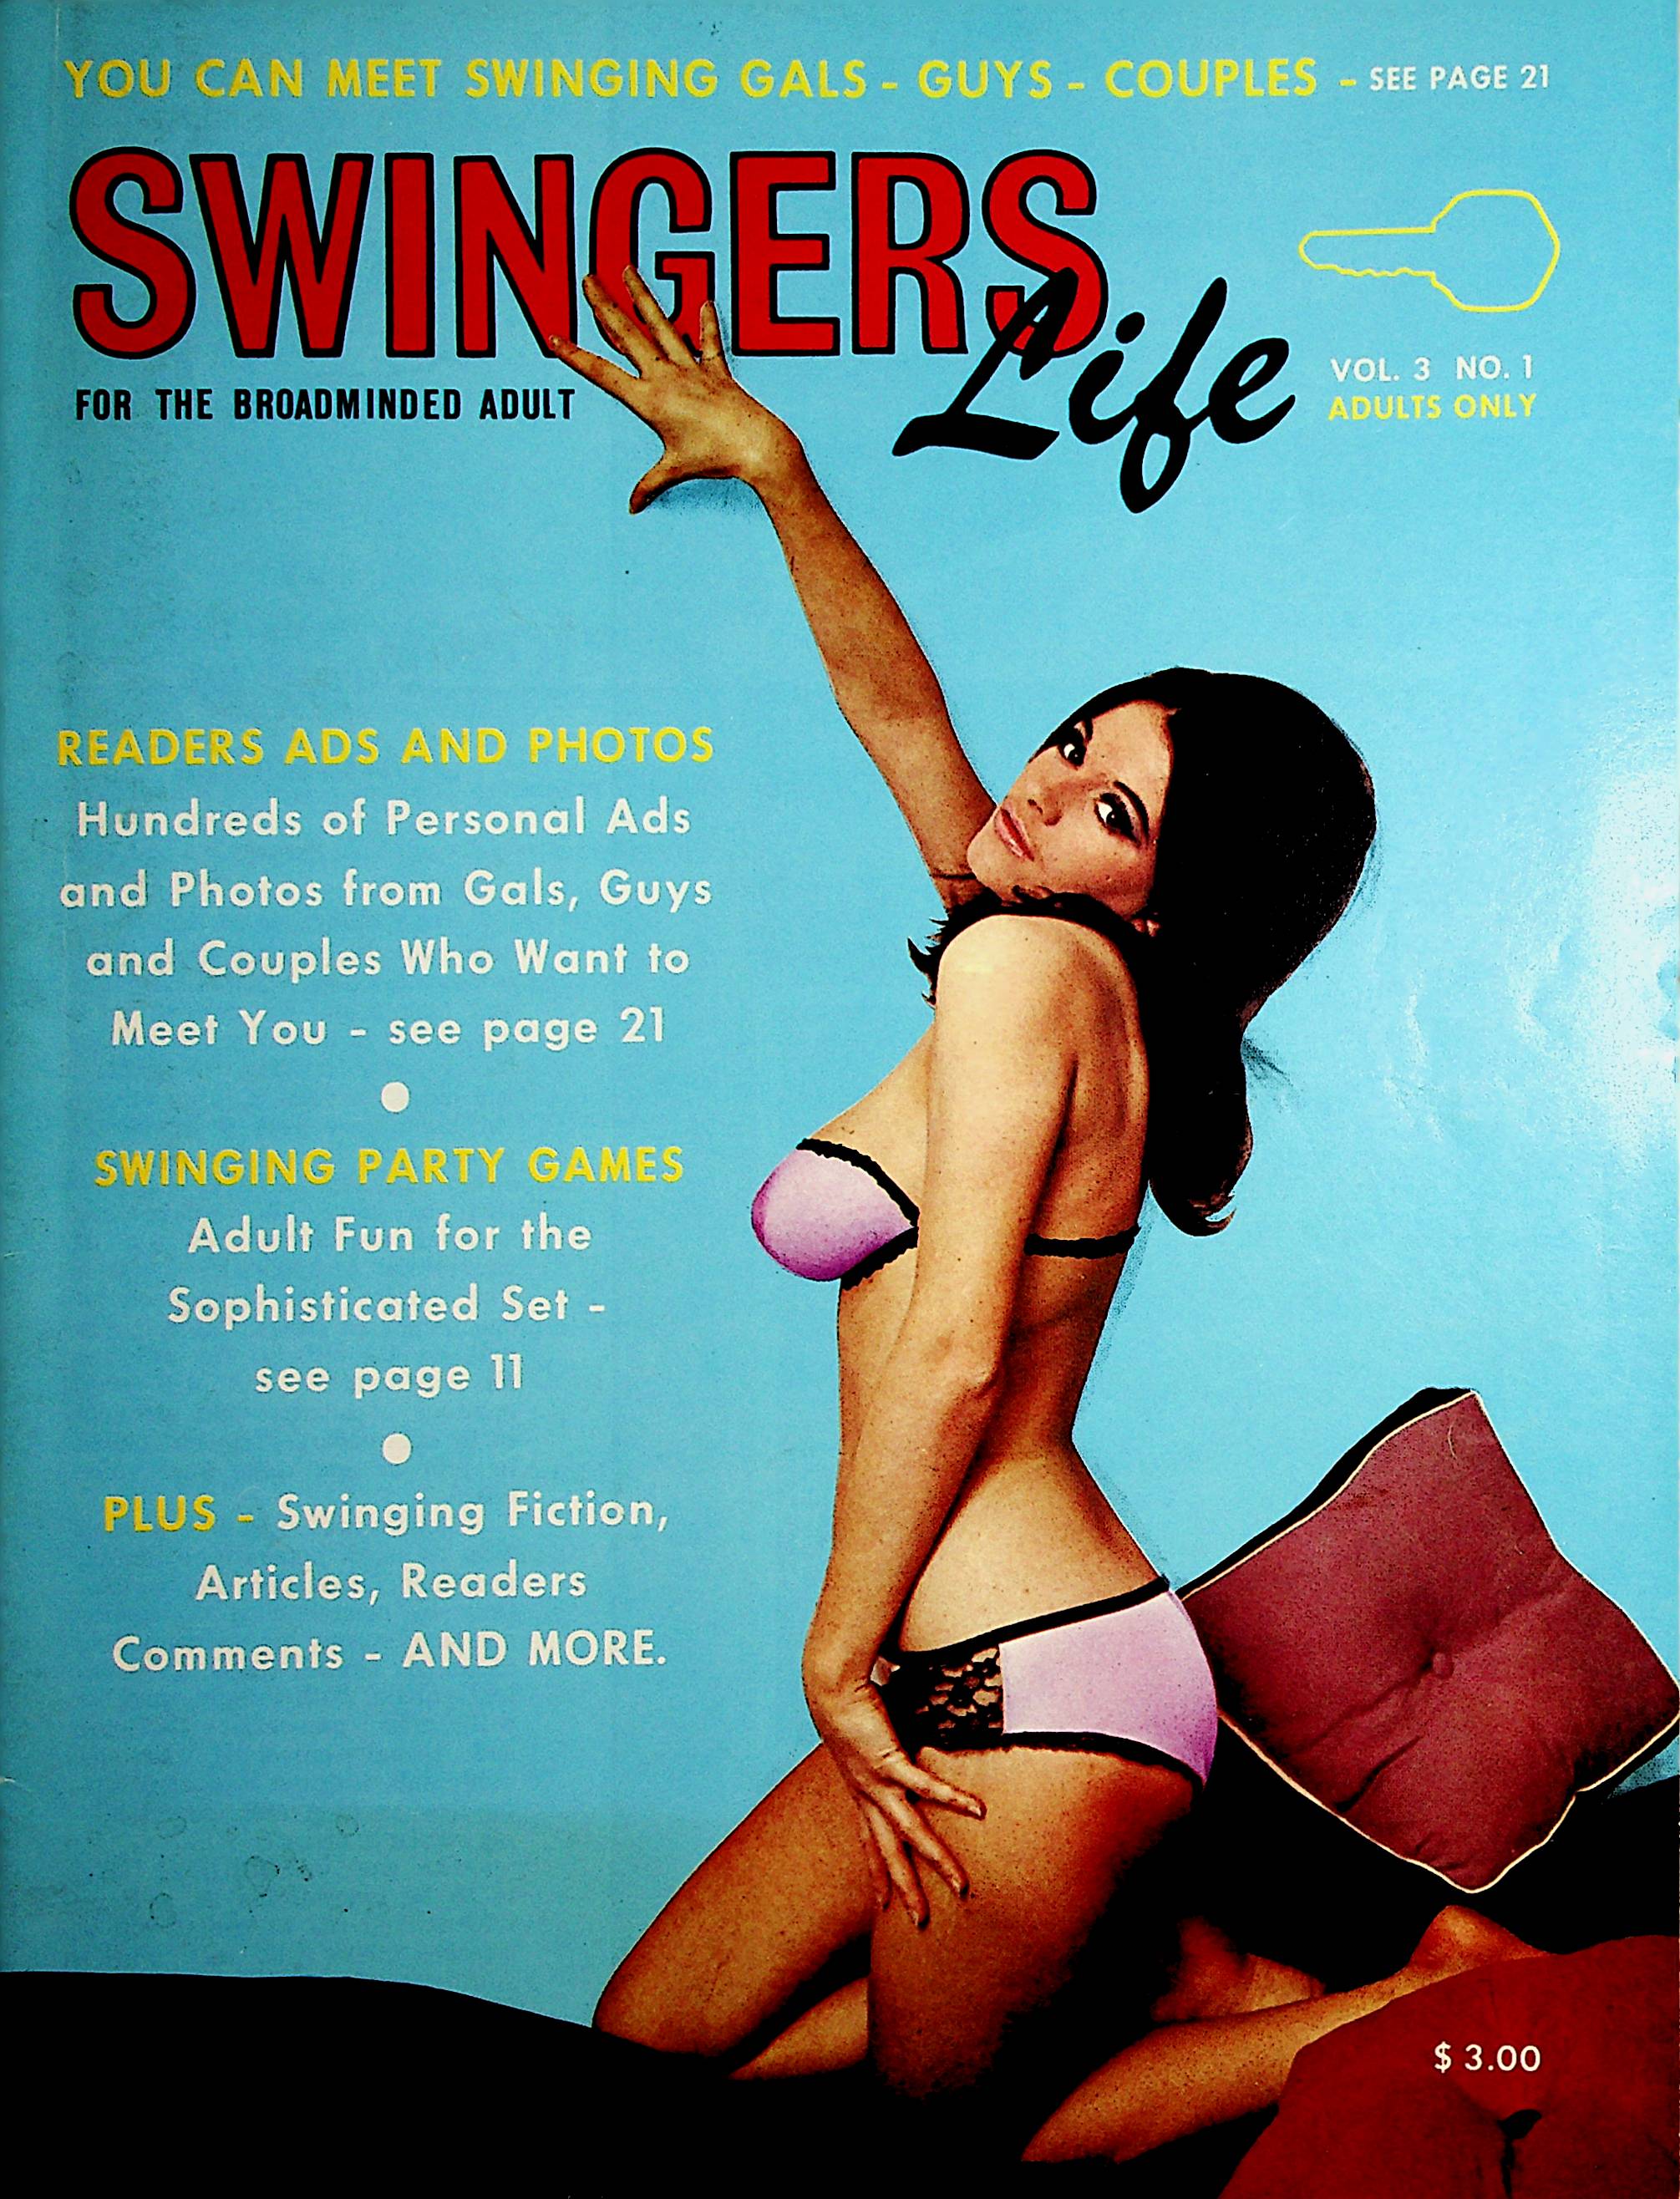 Swingers Life Vintage Contact Magazine Swinging Games vol.3 #1 1968 09 pic